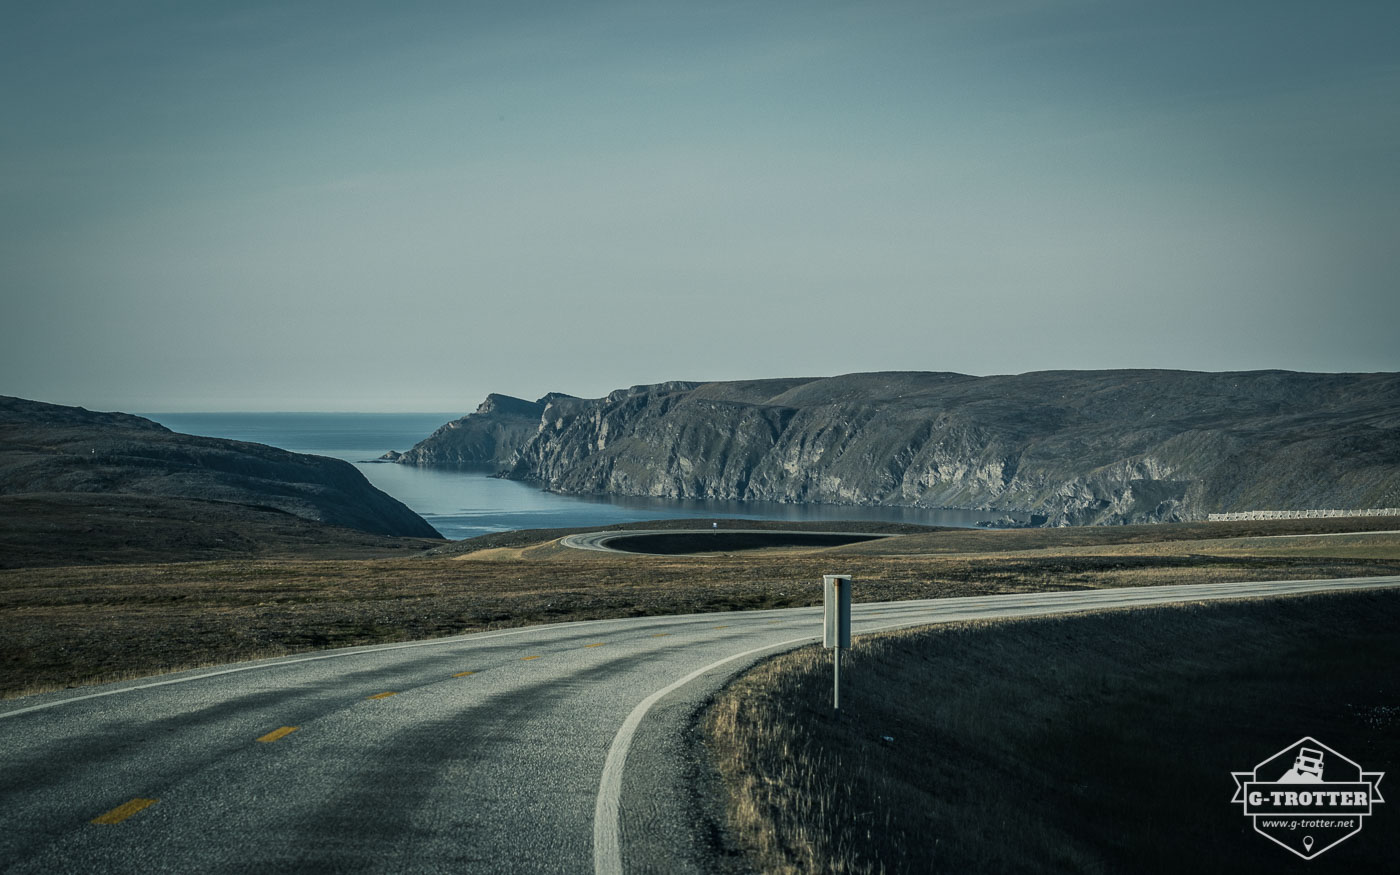 On the way to the North Cape.